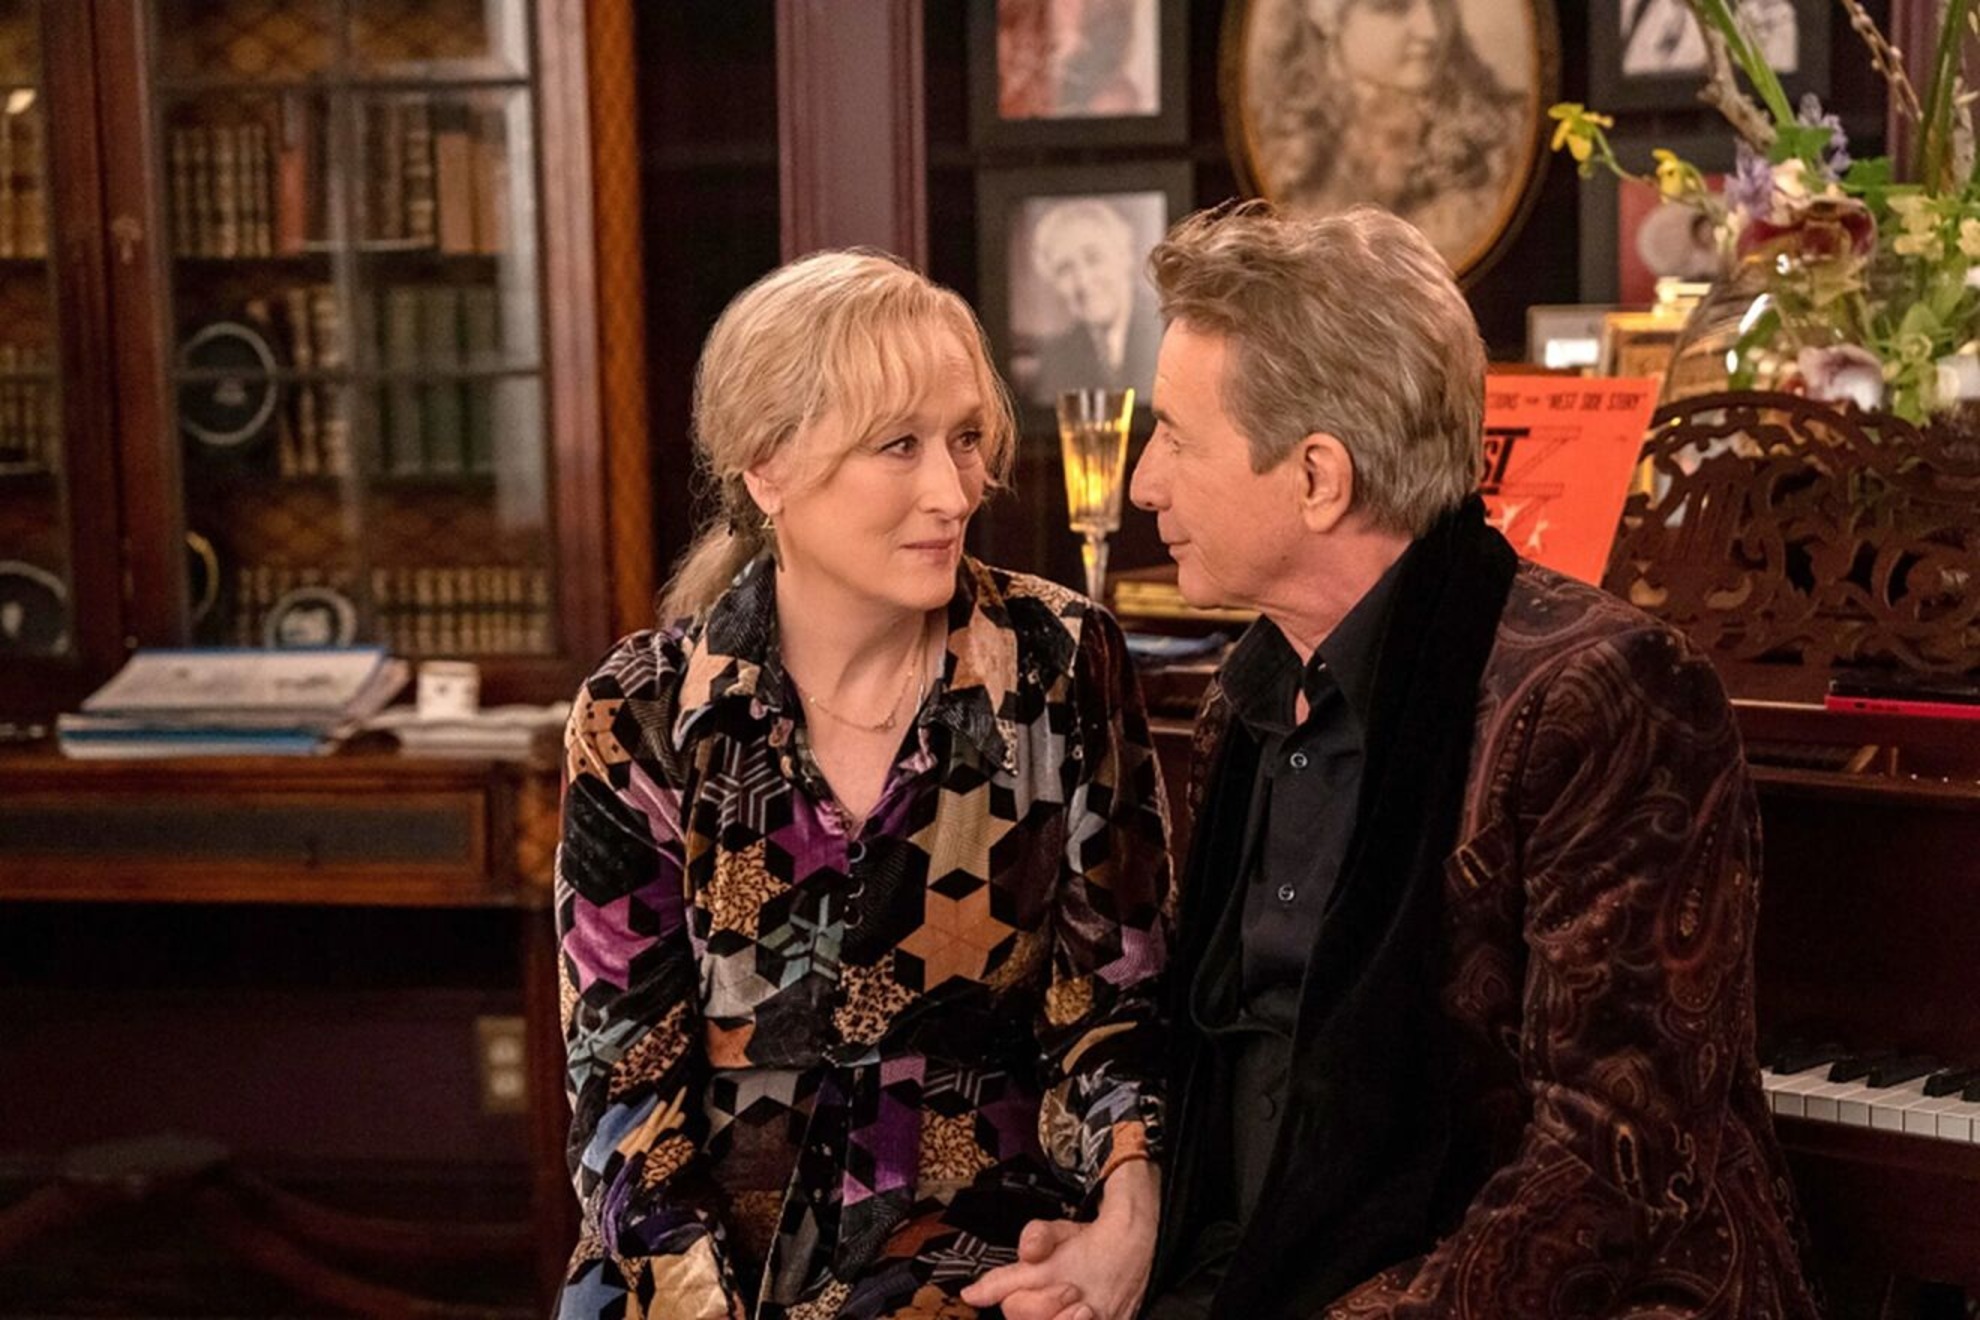 Meryl Streep and Martin Short are caught having dinner together: Is there actually a romance between them?